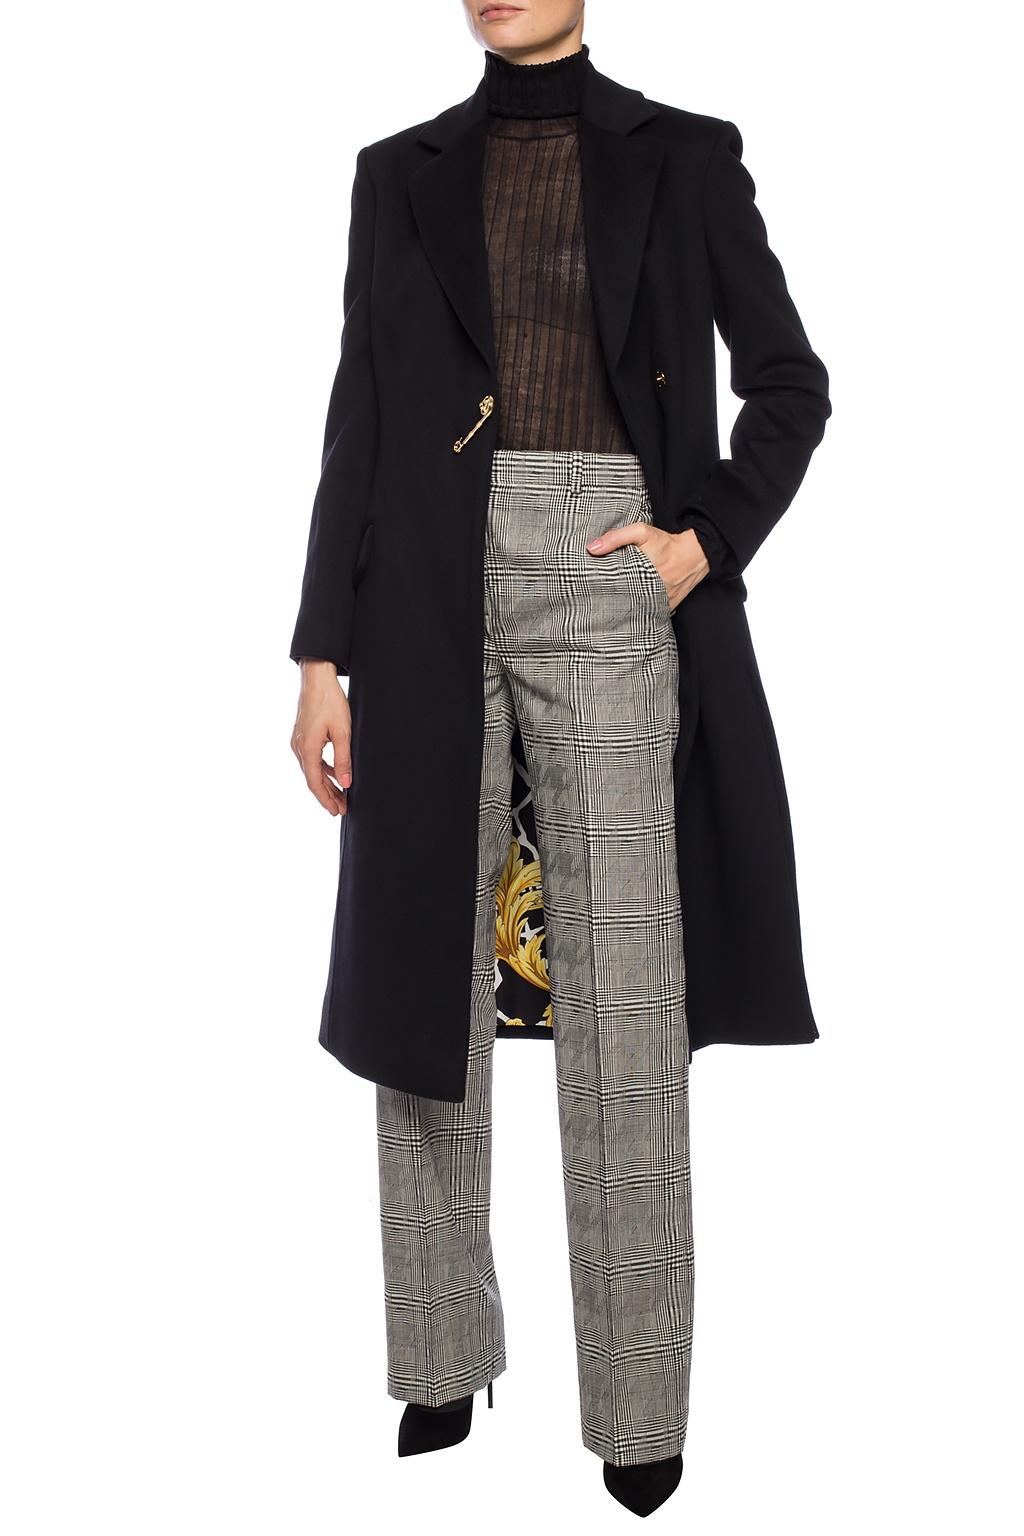 Versace FW19 Runway Grey Wool Hounds Tooth Check Trousers / Pants 

These Versace trousers, seen on the FW19 runway, are an effortless classic closet staple. Featuring a houndstooth print, pleat-front and high waist. Pair it with the matching blazer